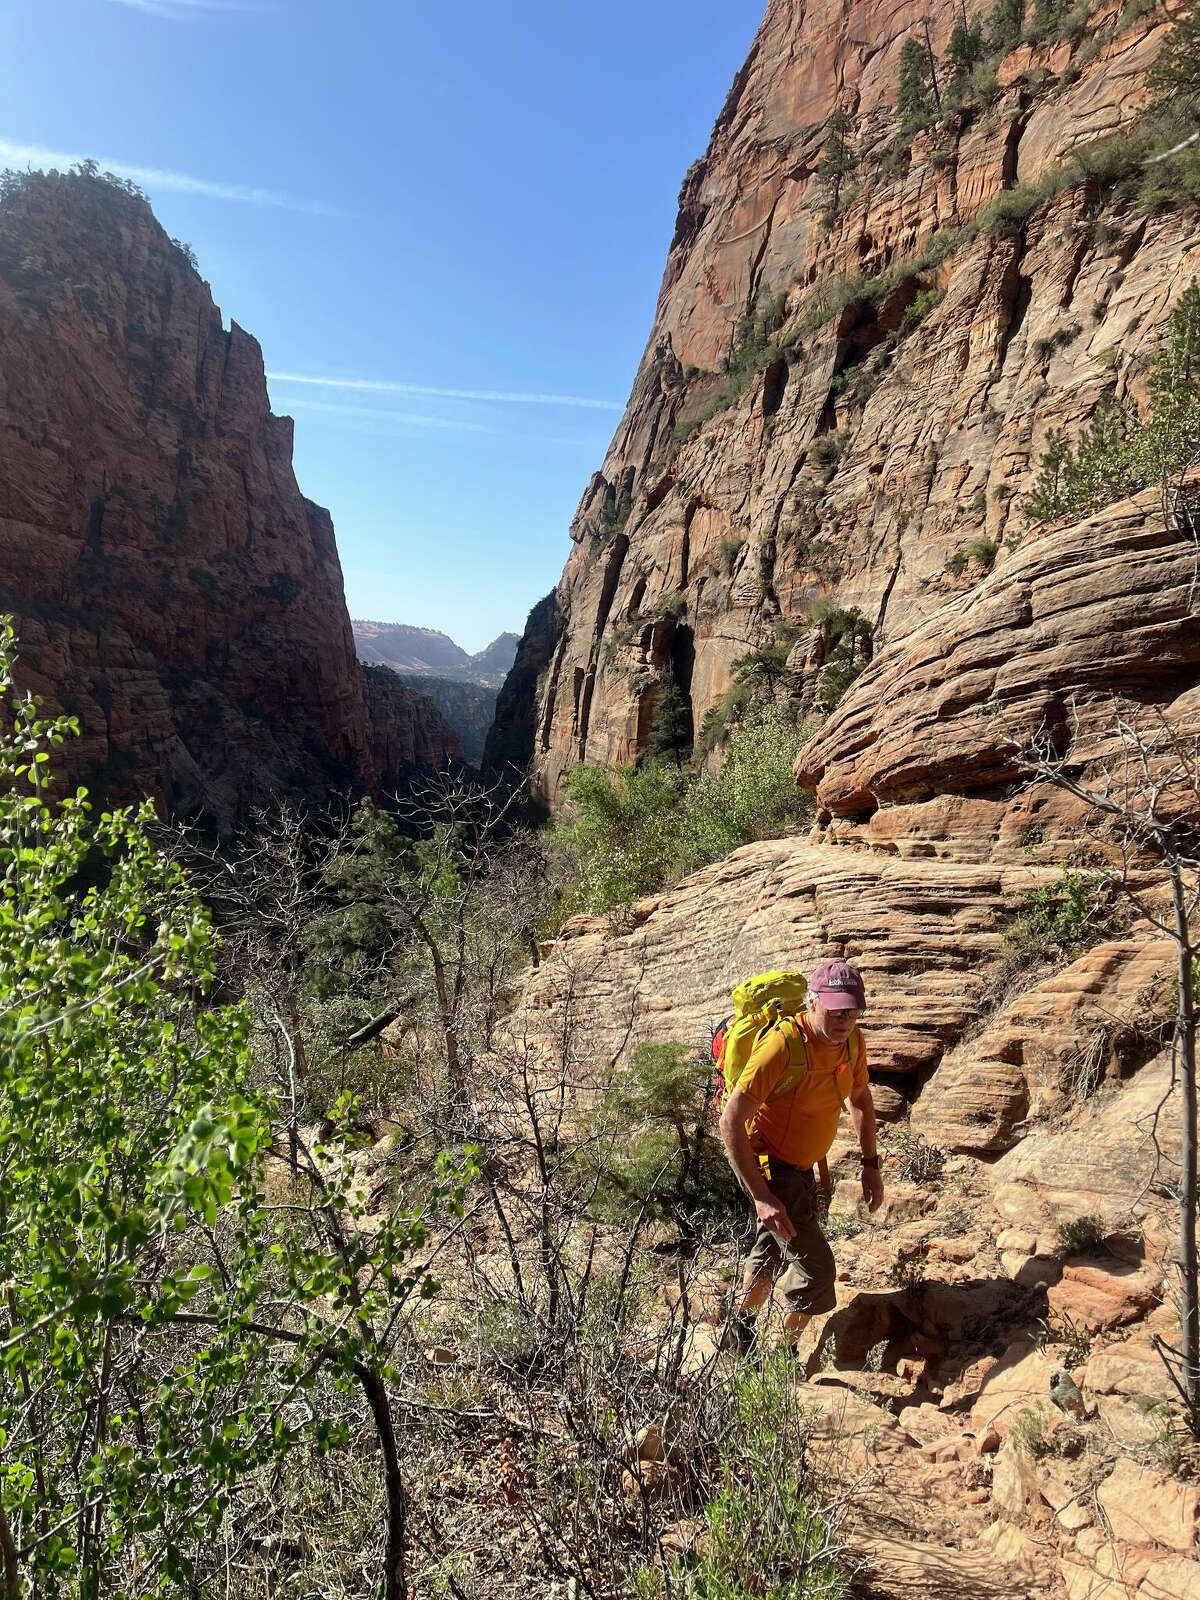 The day began with a four-mile hike to the upper end of the canyon. Photo by Jared Wright